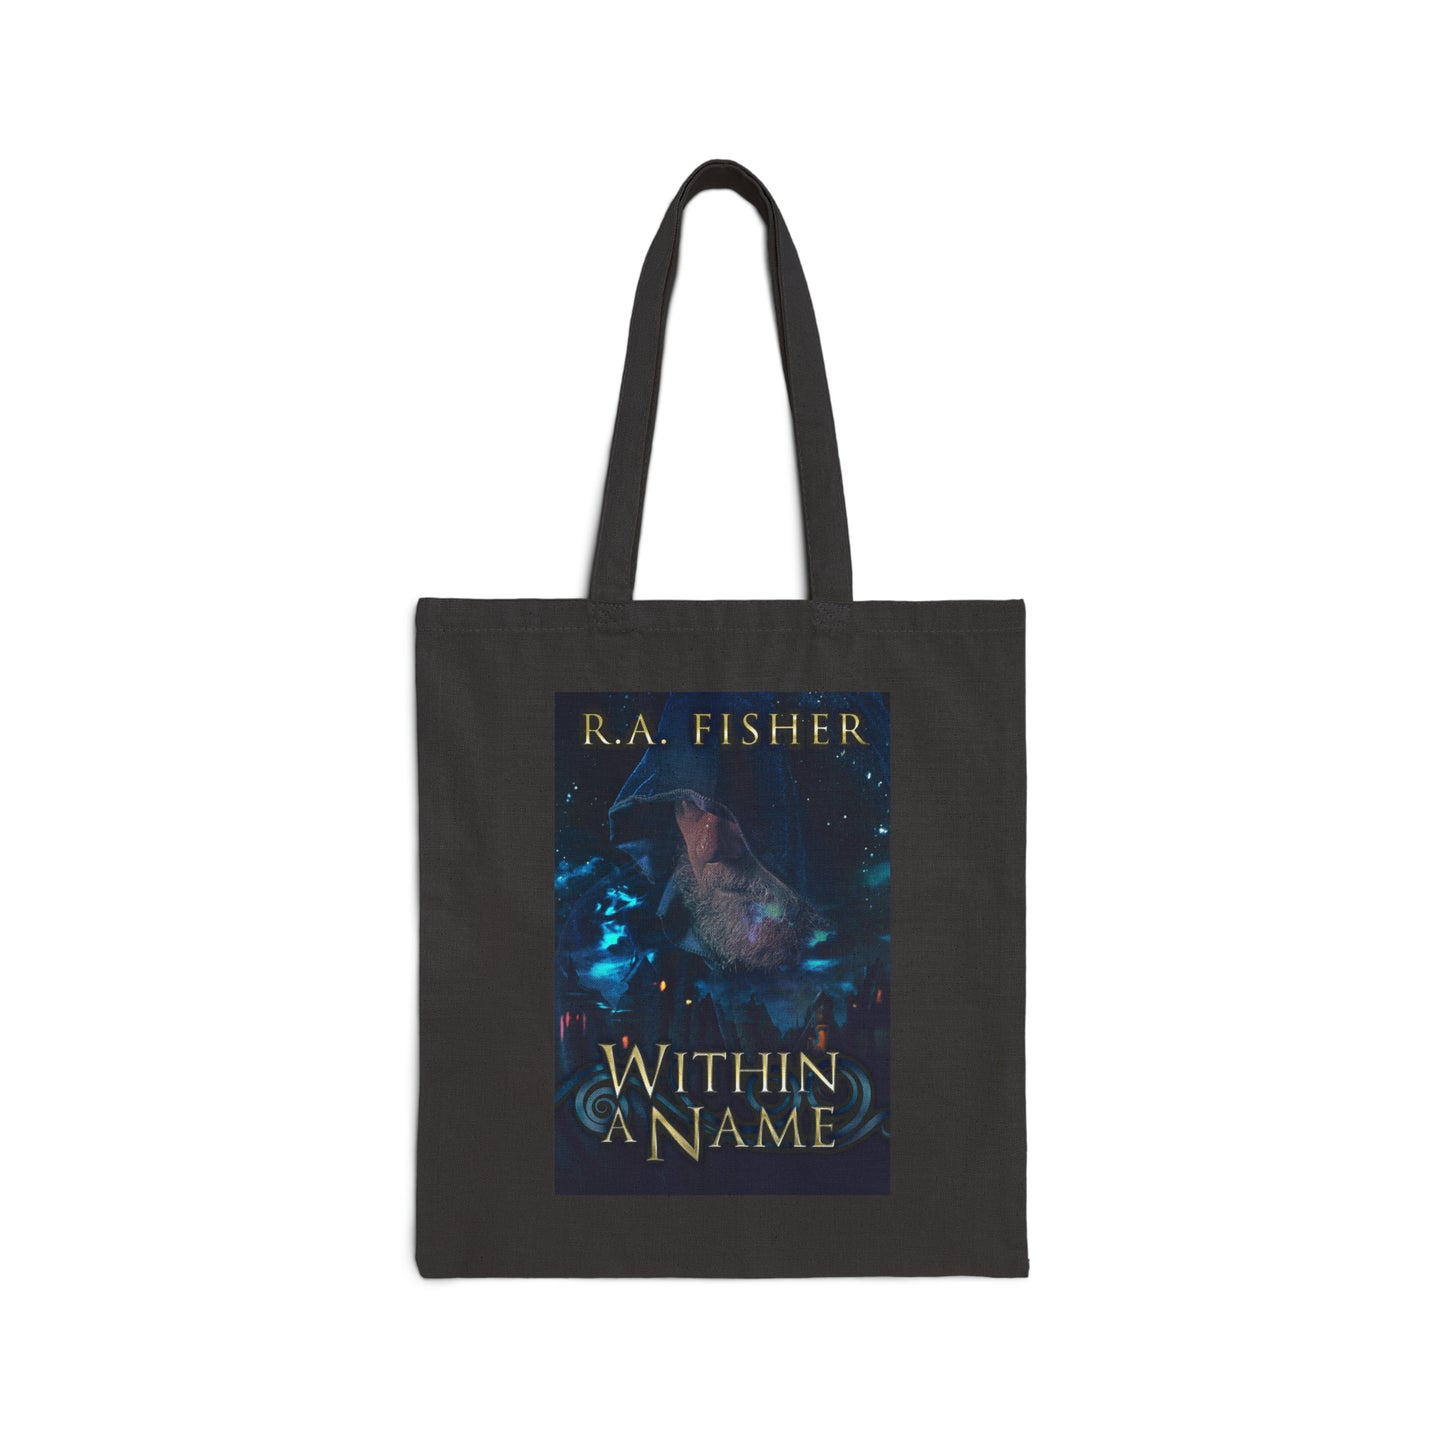 Within A Name - Cotton Canvas Tote Bag